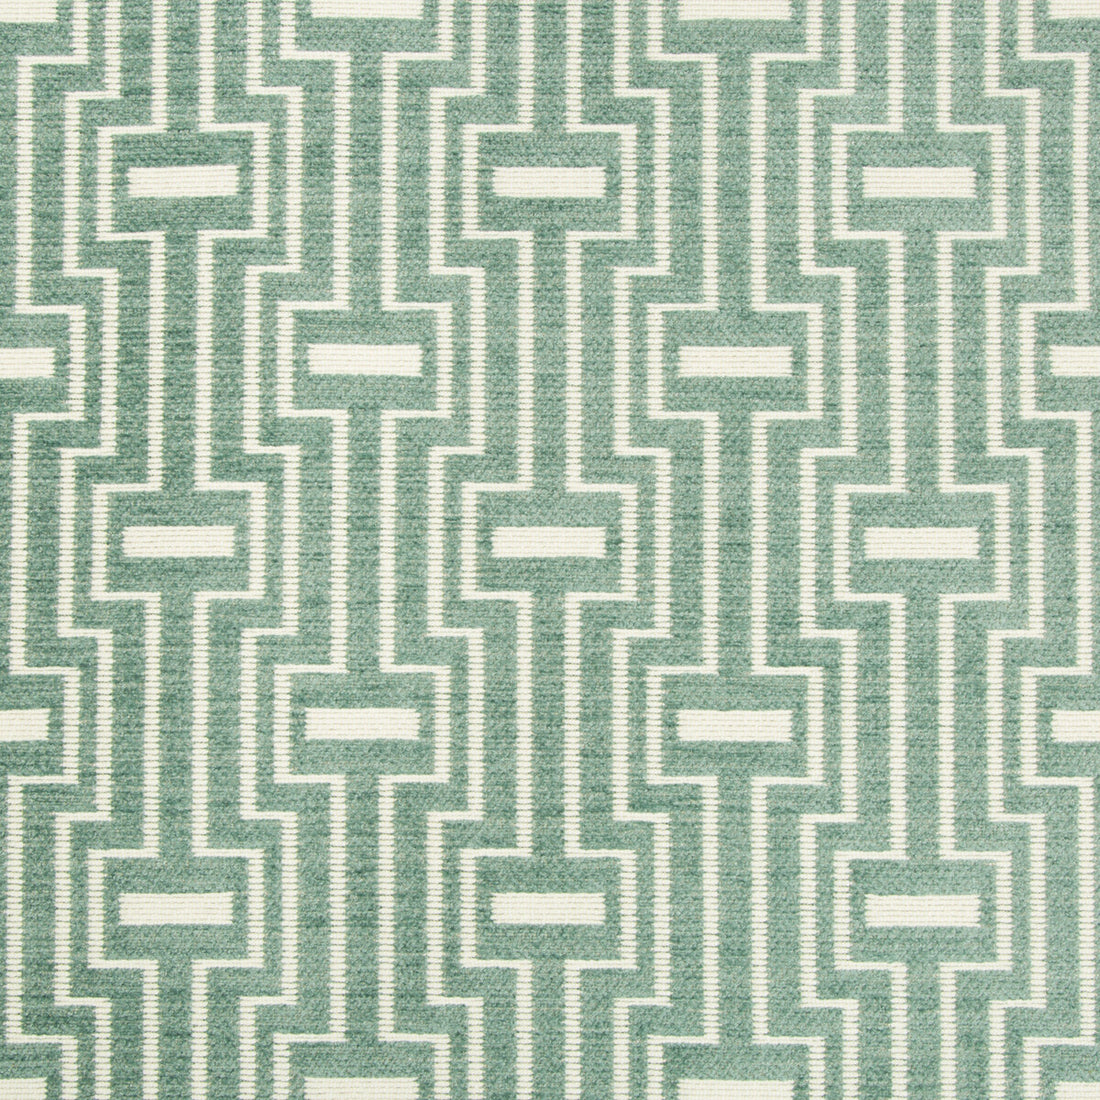 Kravet Contract fabric in 34753-35 color - pattern 34753.35.0 - by Kravet Contract in the Gis collection